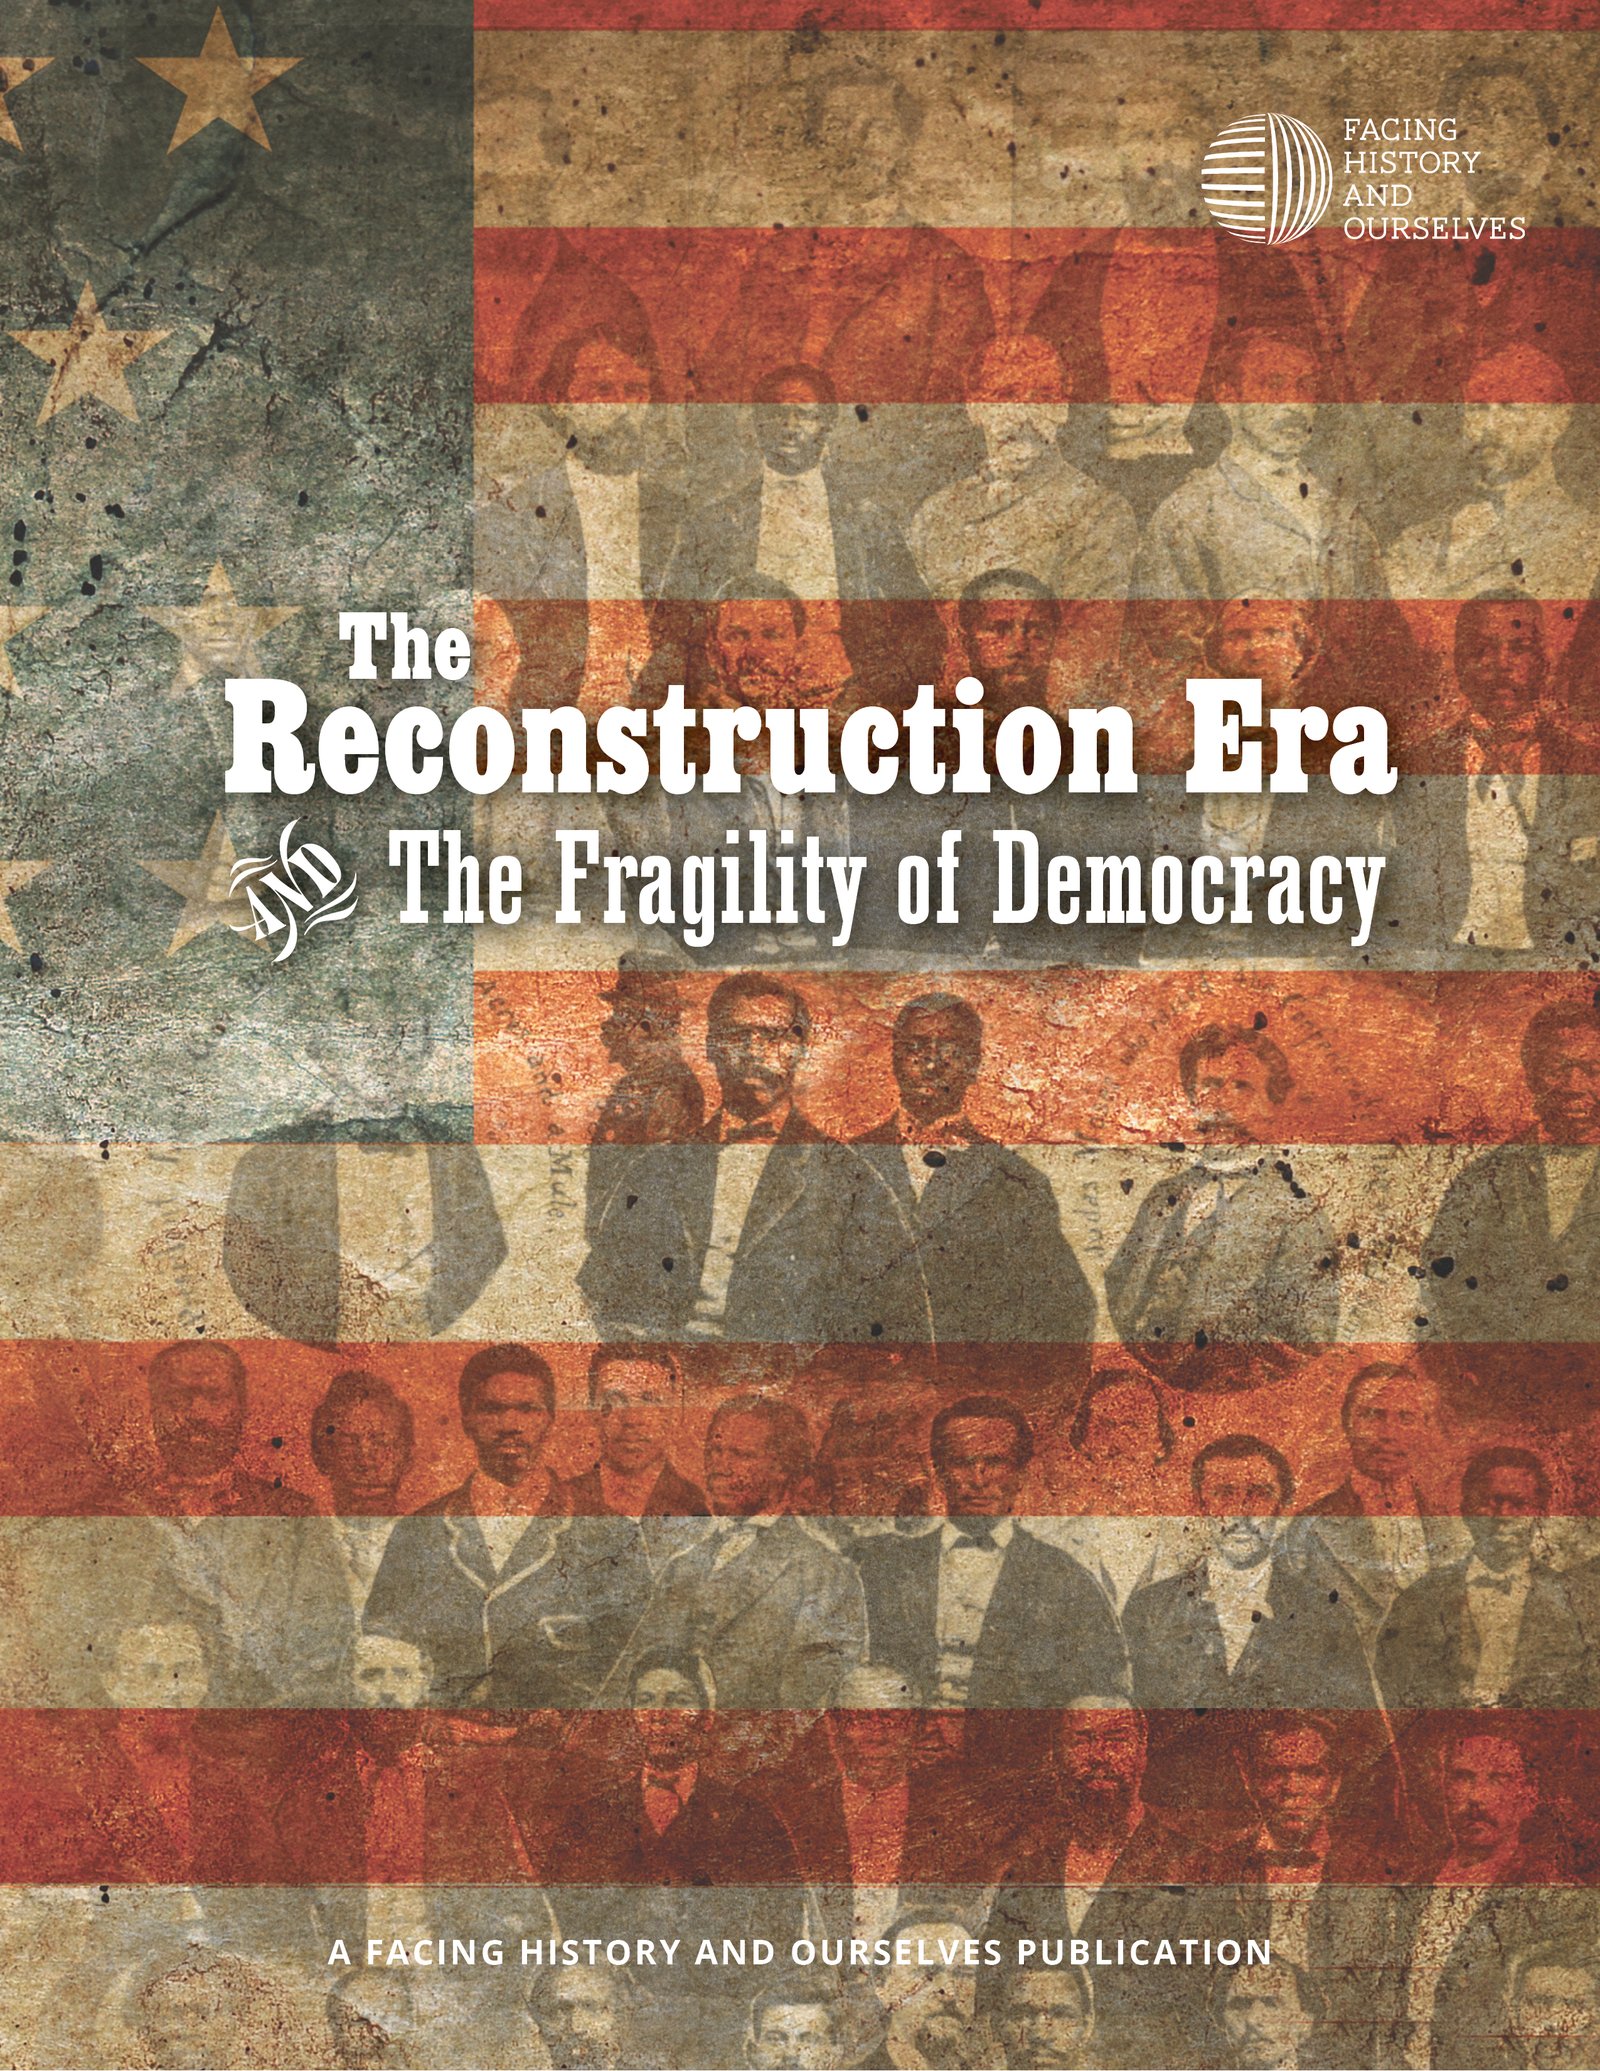 The Reconstruction Era and The Fragility of Democracy